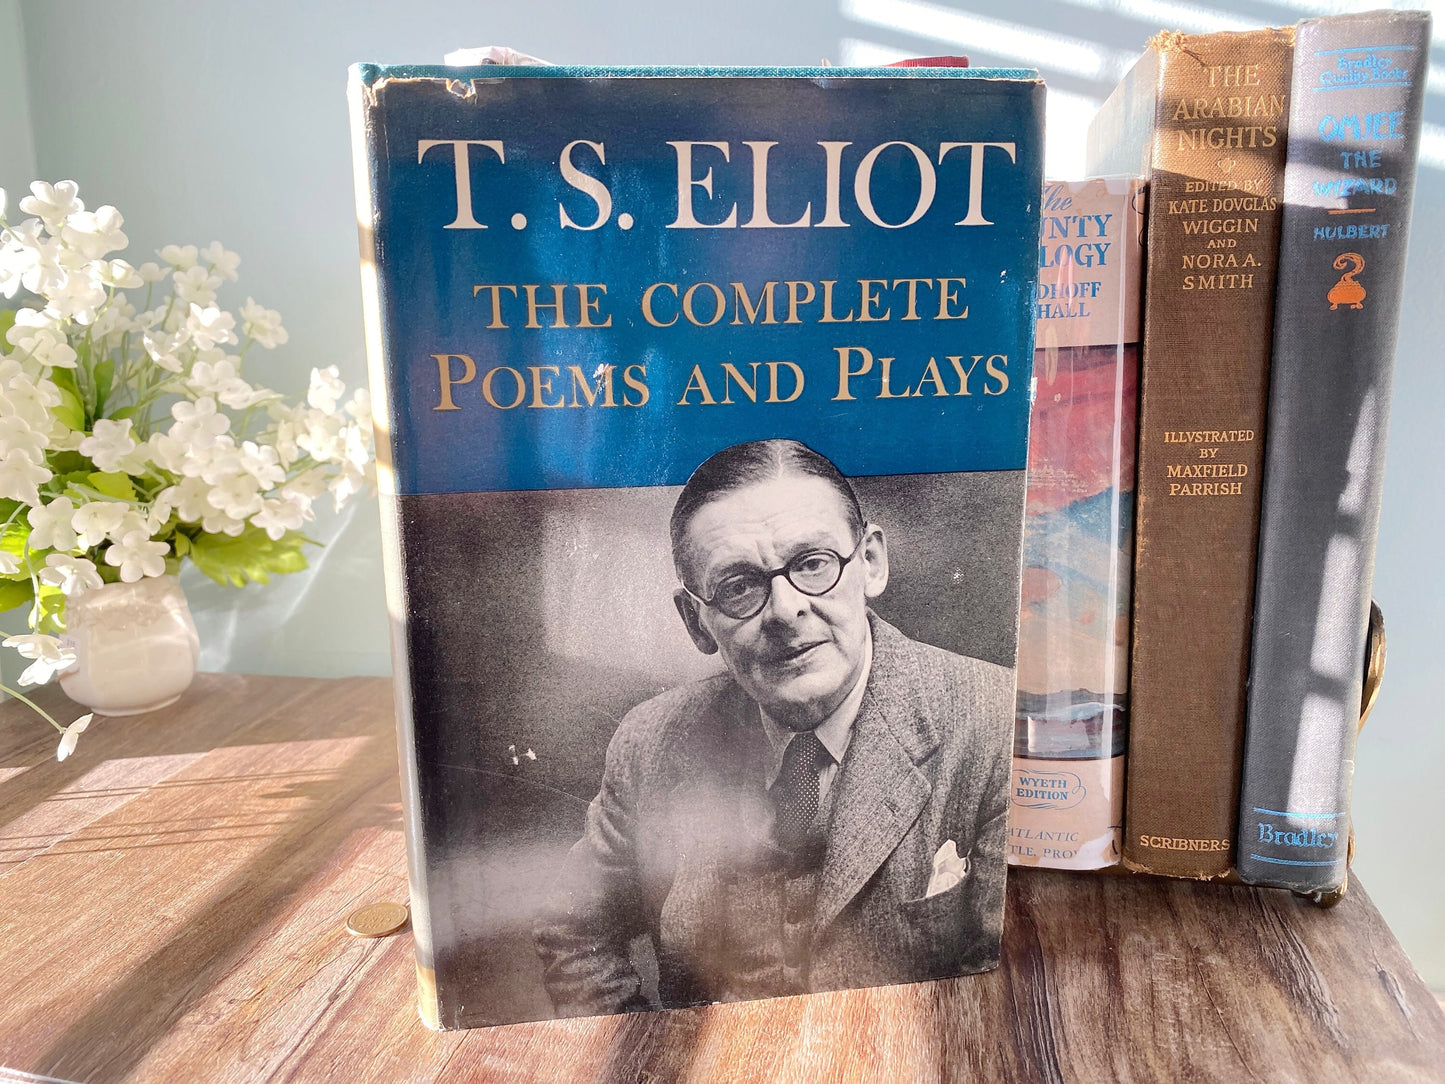 Vintage Book T.S. Eliot The Complete Poems and Plays 1952 Edition